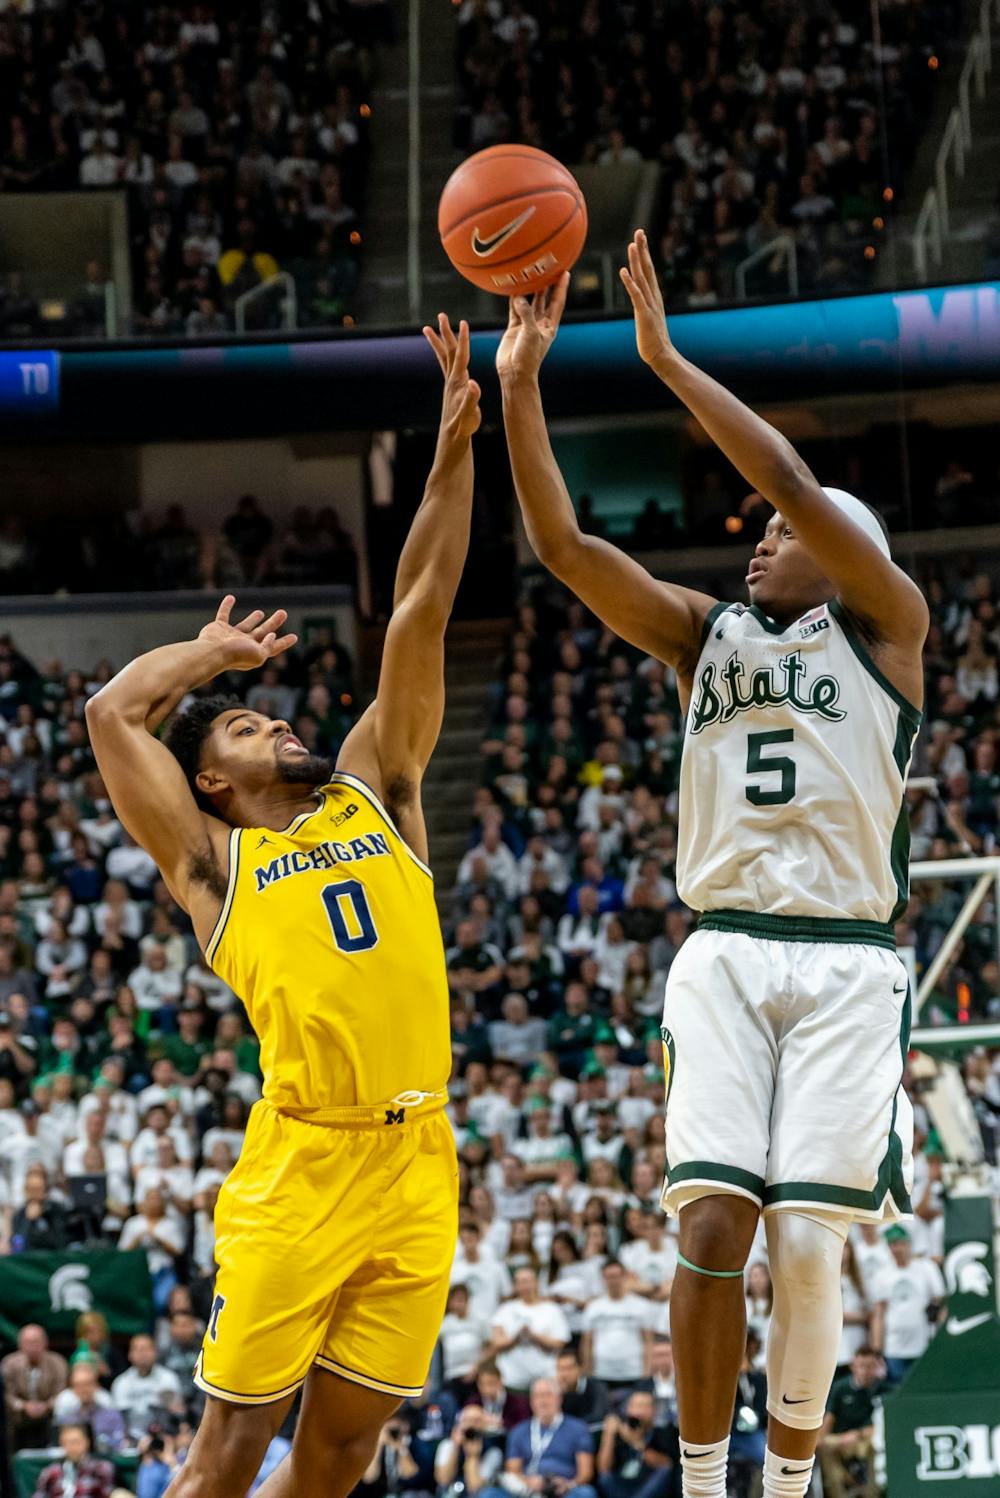 Senior guard Cassius Winston (5) shoots over Michigan guard David DeJulius (0).The Spartans defeated Michigan, 87-69, at the Breslin Student Events Center on January 5, 2020. 